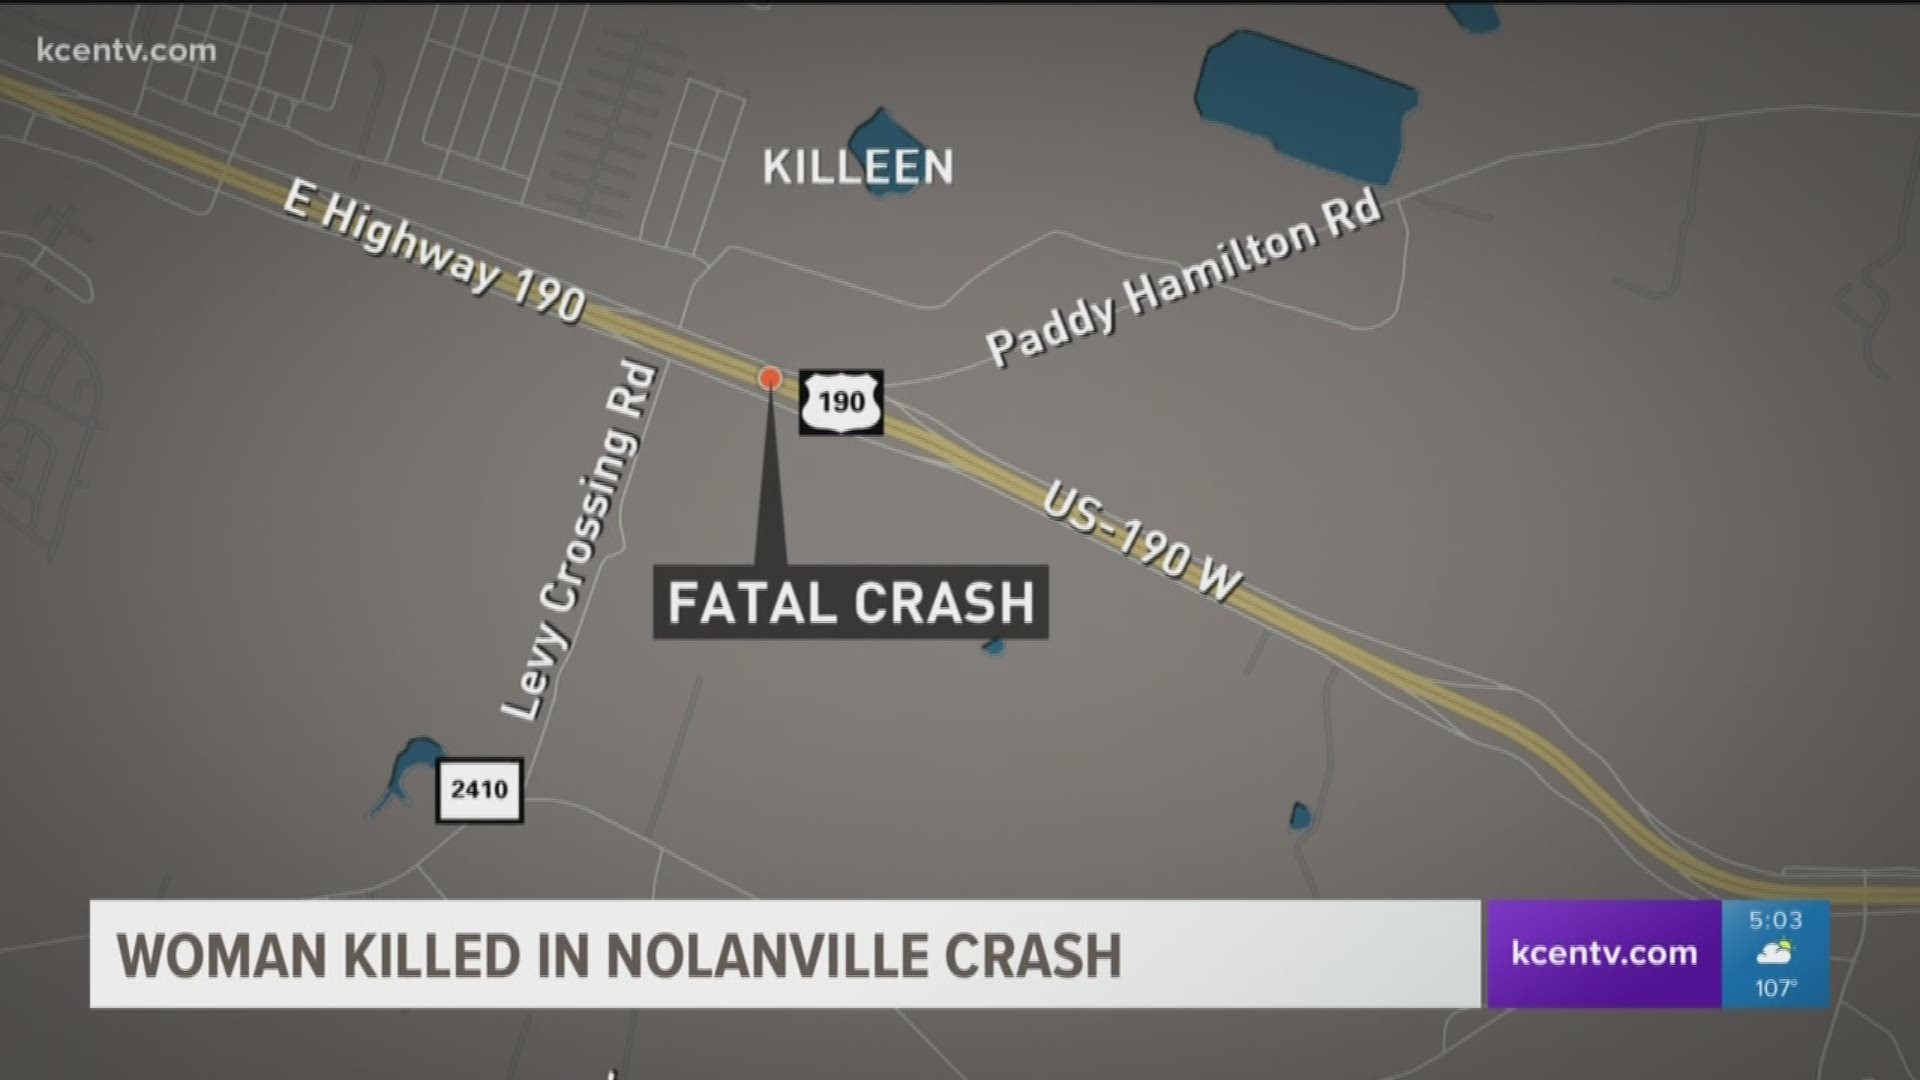 54-year-old Killeen resident was trying to walk across the highway when she was hit by a car.